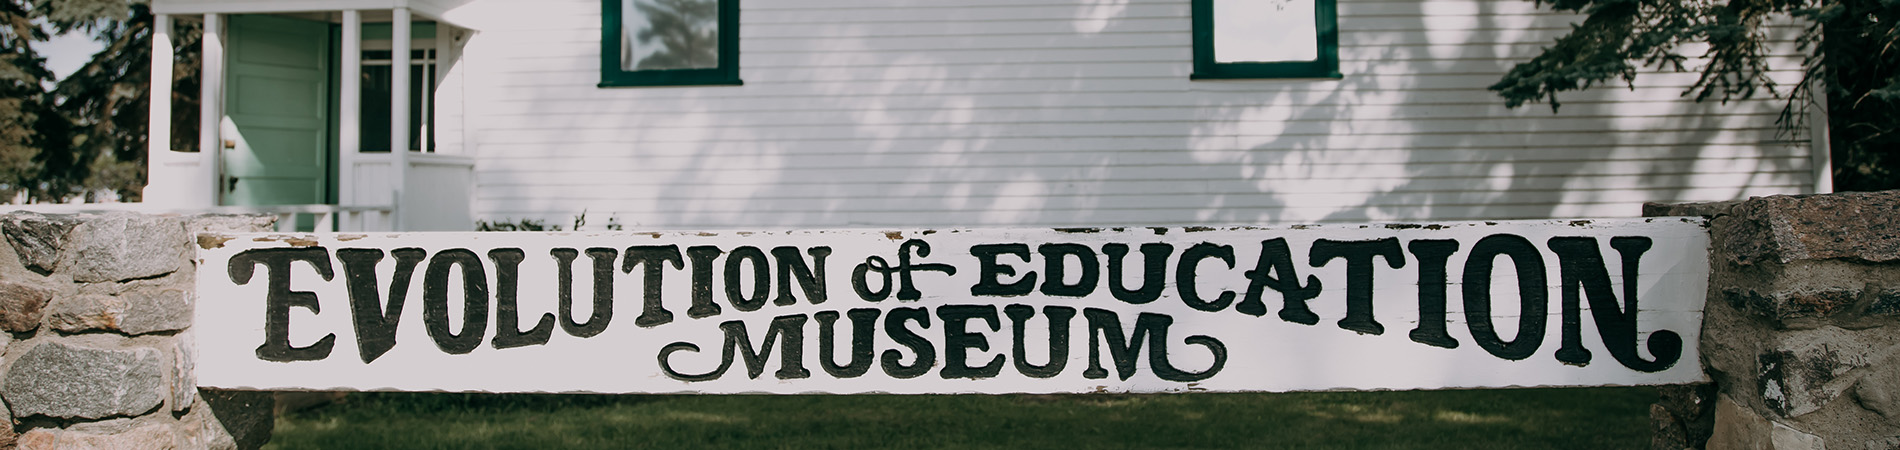 Education Museum sign